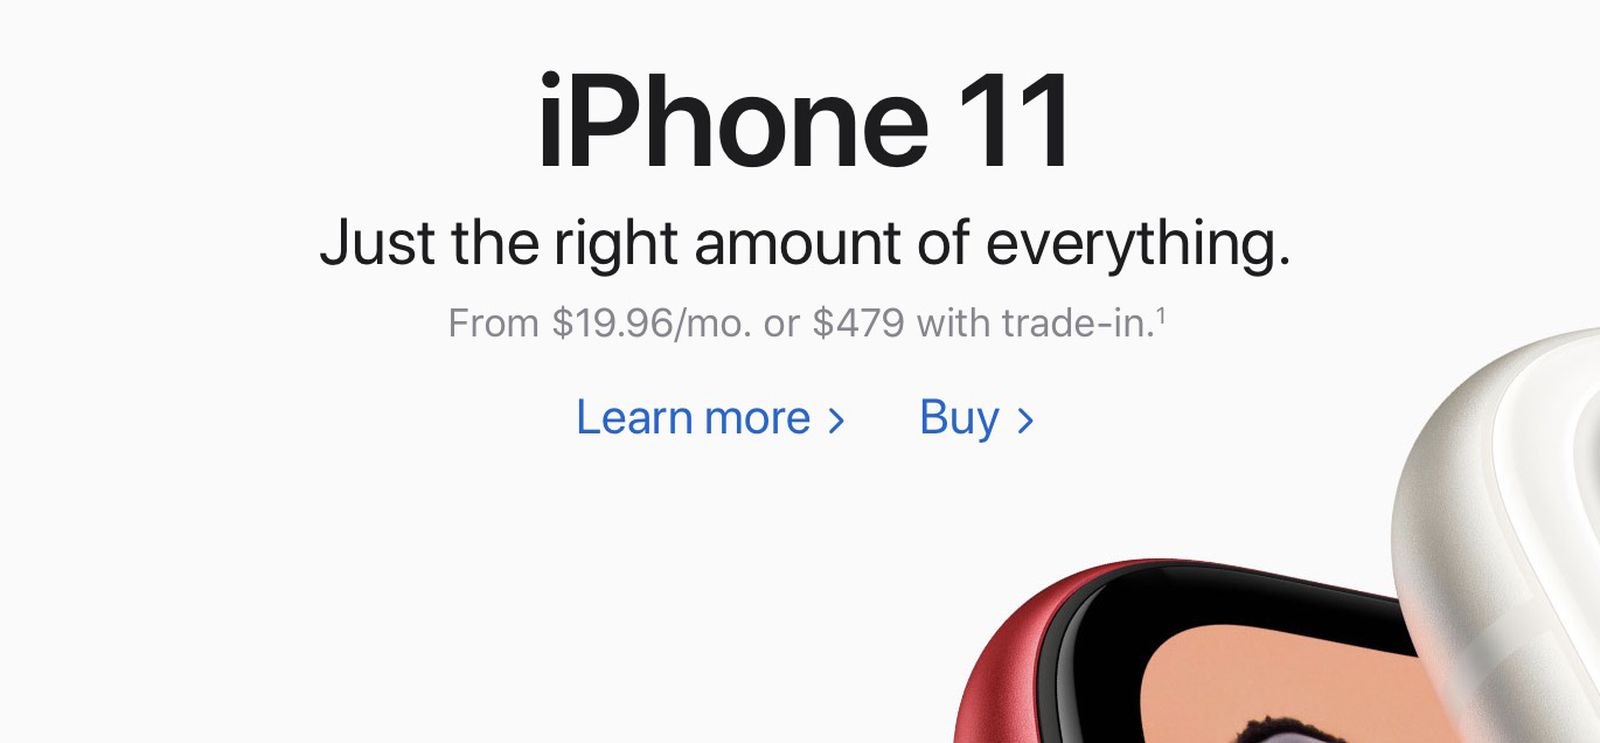 Apple Cuts iPhone Trade-In Values as iPhone 12 Launch Nears - MacRumors